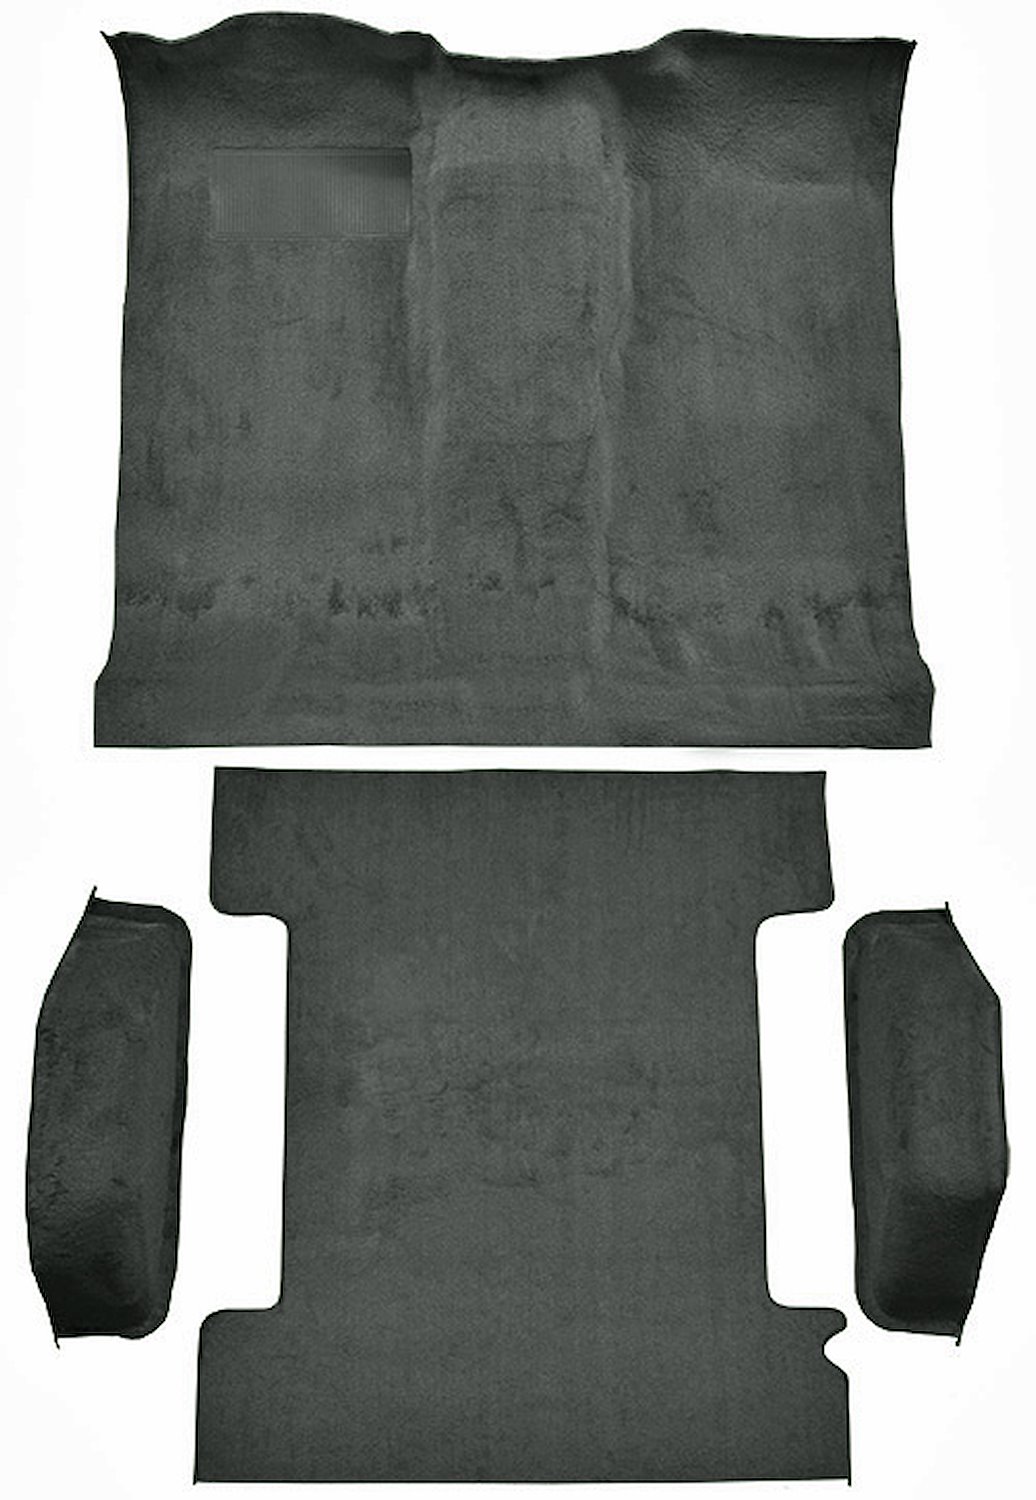 Molded Cut Pile Passenger and Cargo Area Carpet for 1974-1977 Chevy Blazer, GMC Jimmy [OE Jute Backing, 4-Piece, Dark Gray]